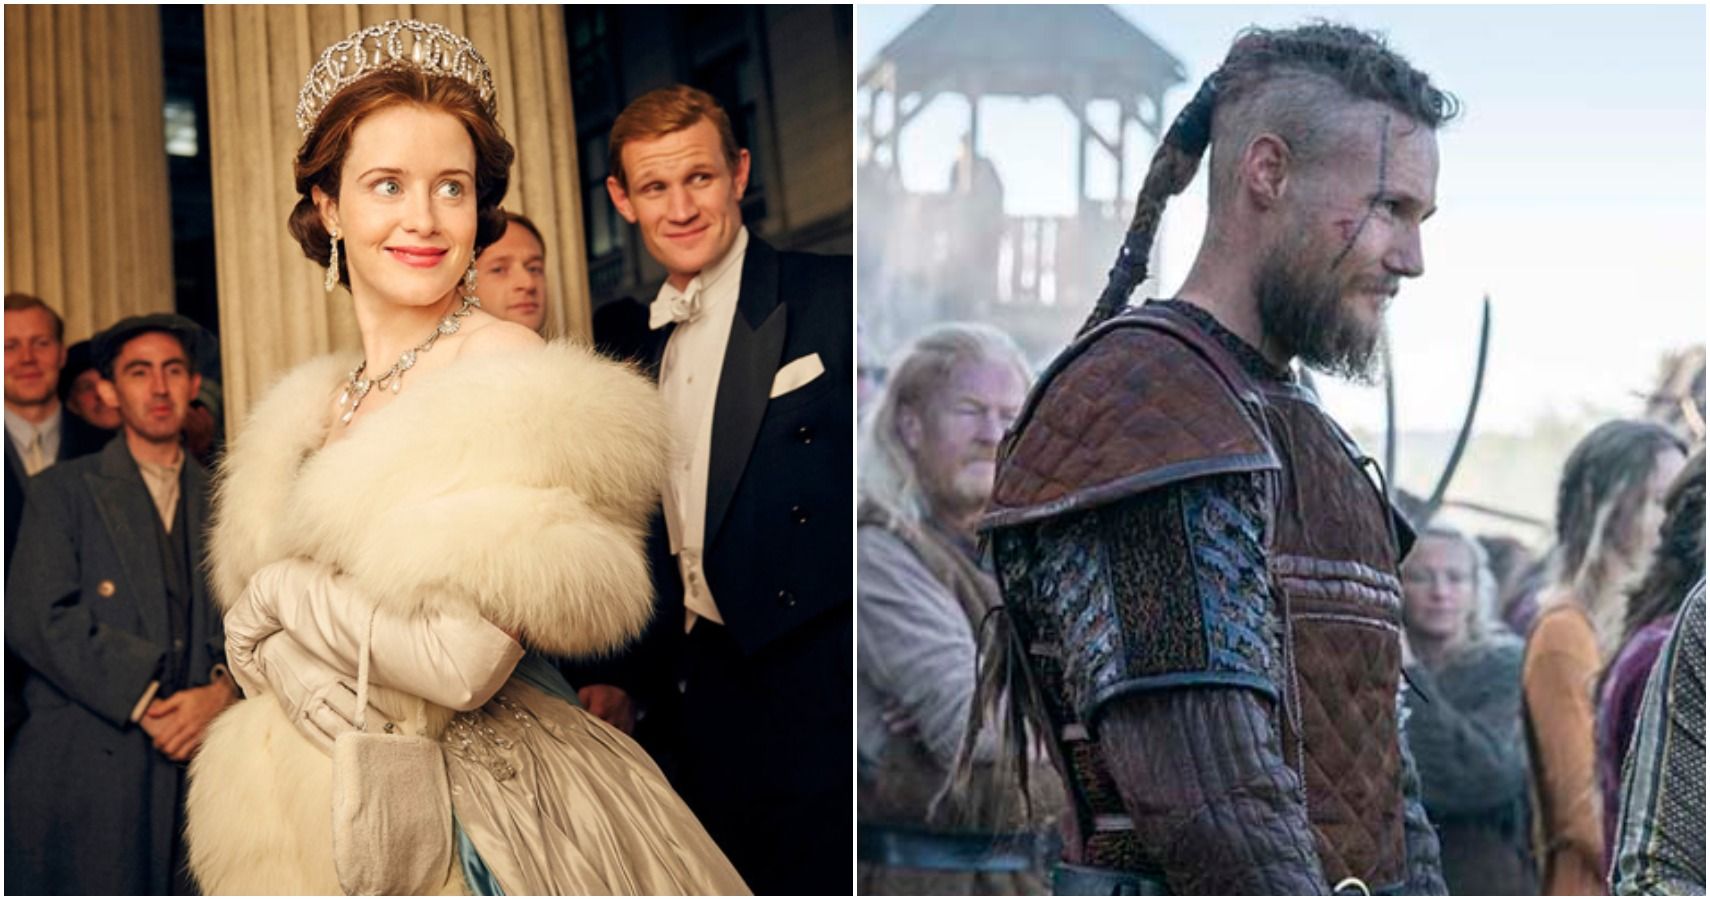 15 Of The Best Historical TV Shows (According To IMDb)